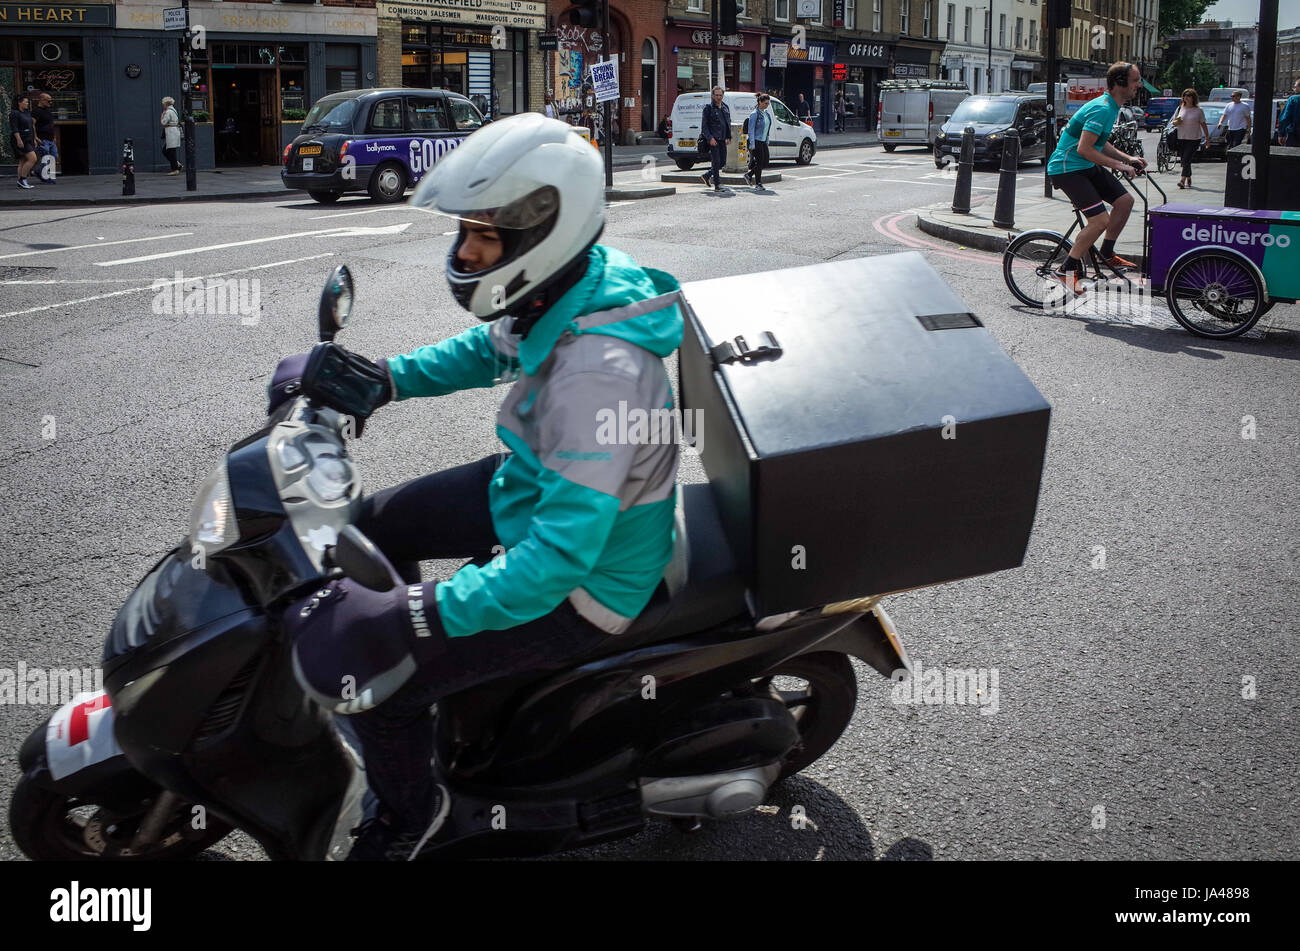 Two Deliveroo food delivery couriers pass in central London, one on a scooter, the other on a cargo bike Stock Photo